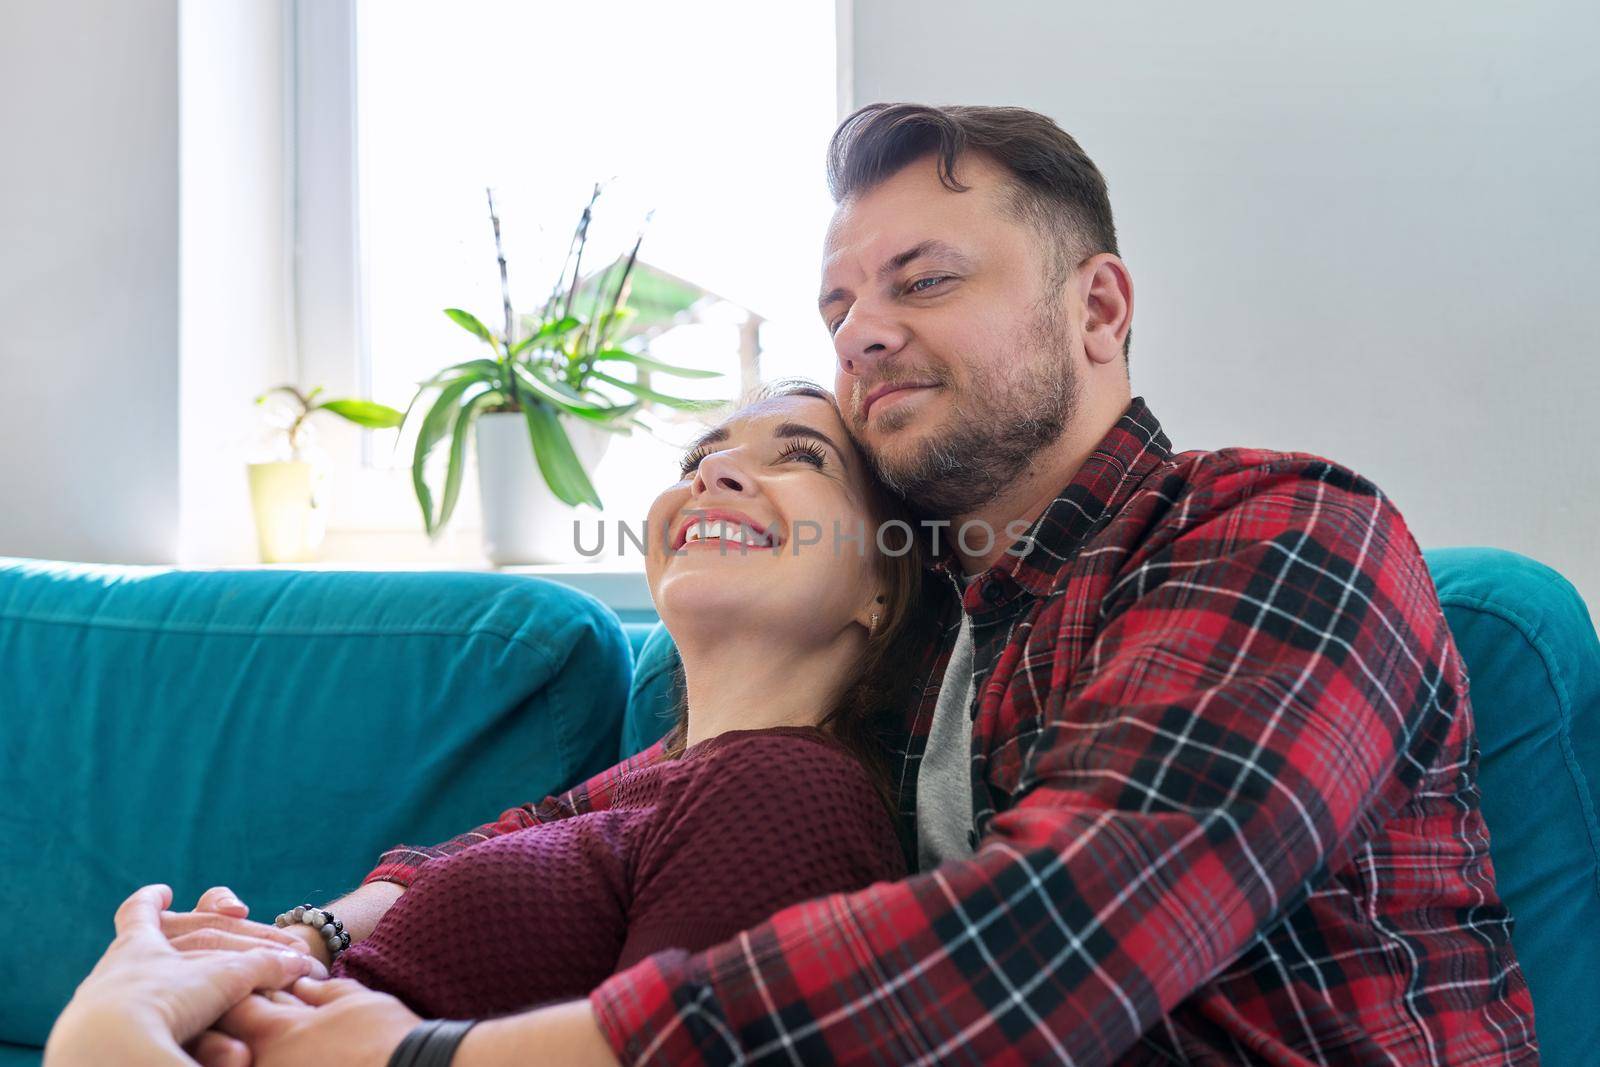 Happy middle-aged couple embracing at home on the couch. Family, happiness, love, relationships, people 40 years old concept